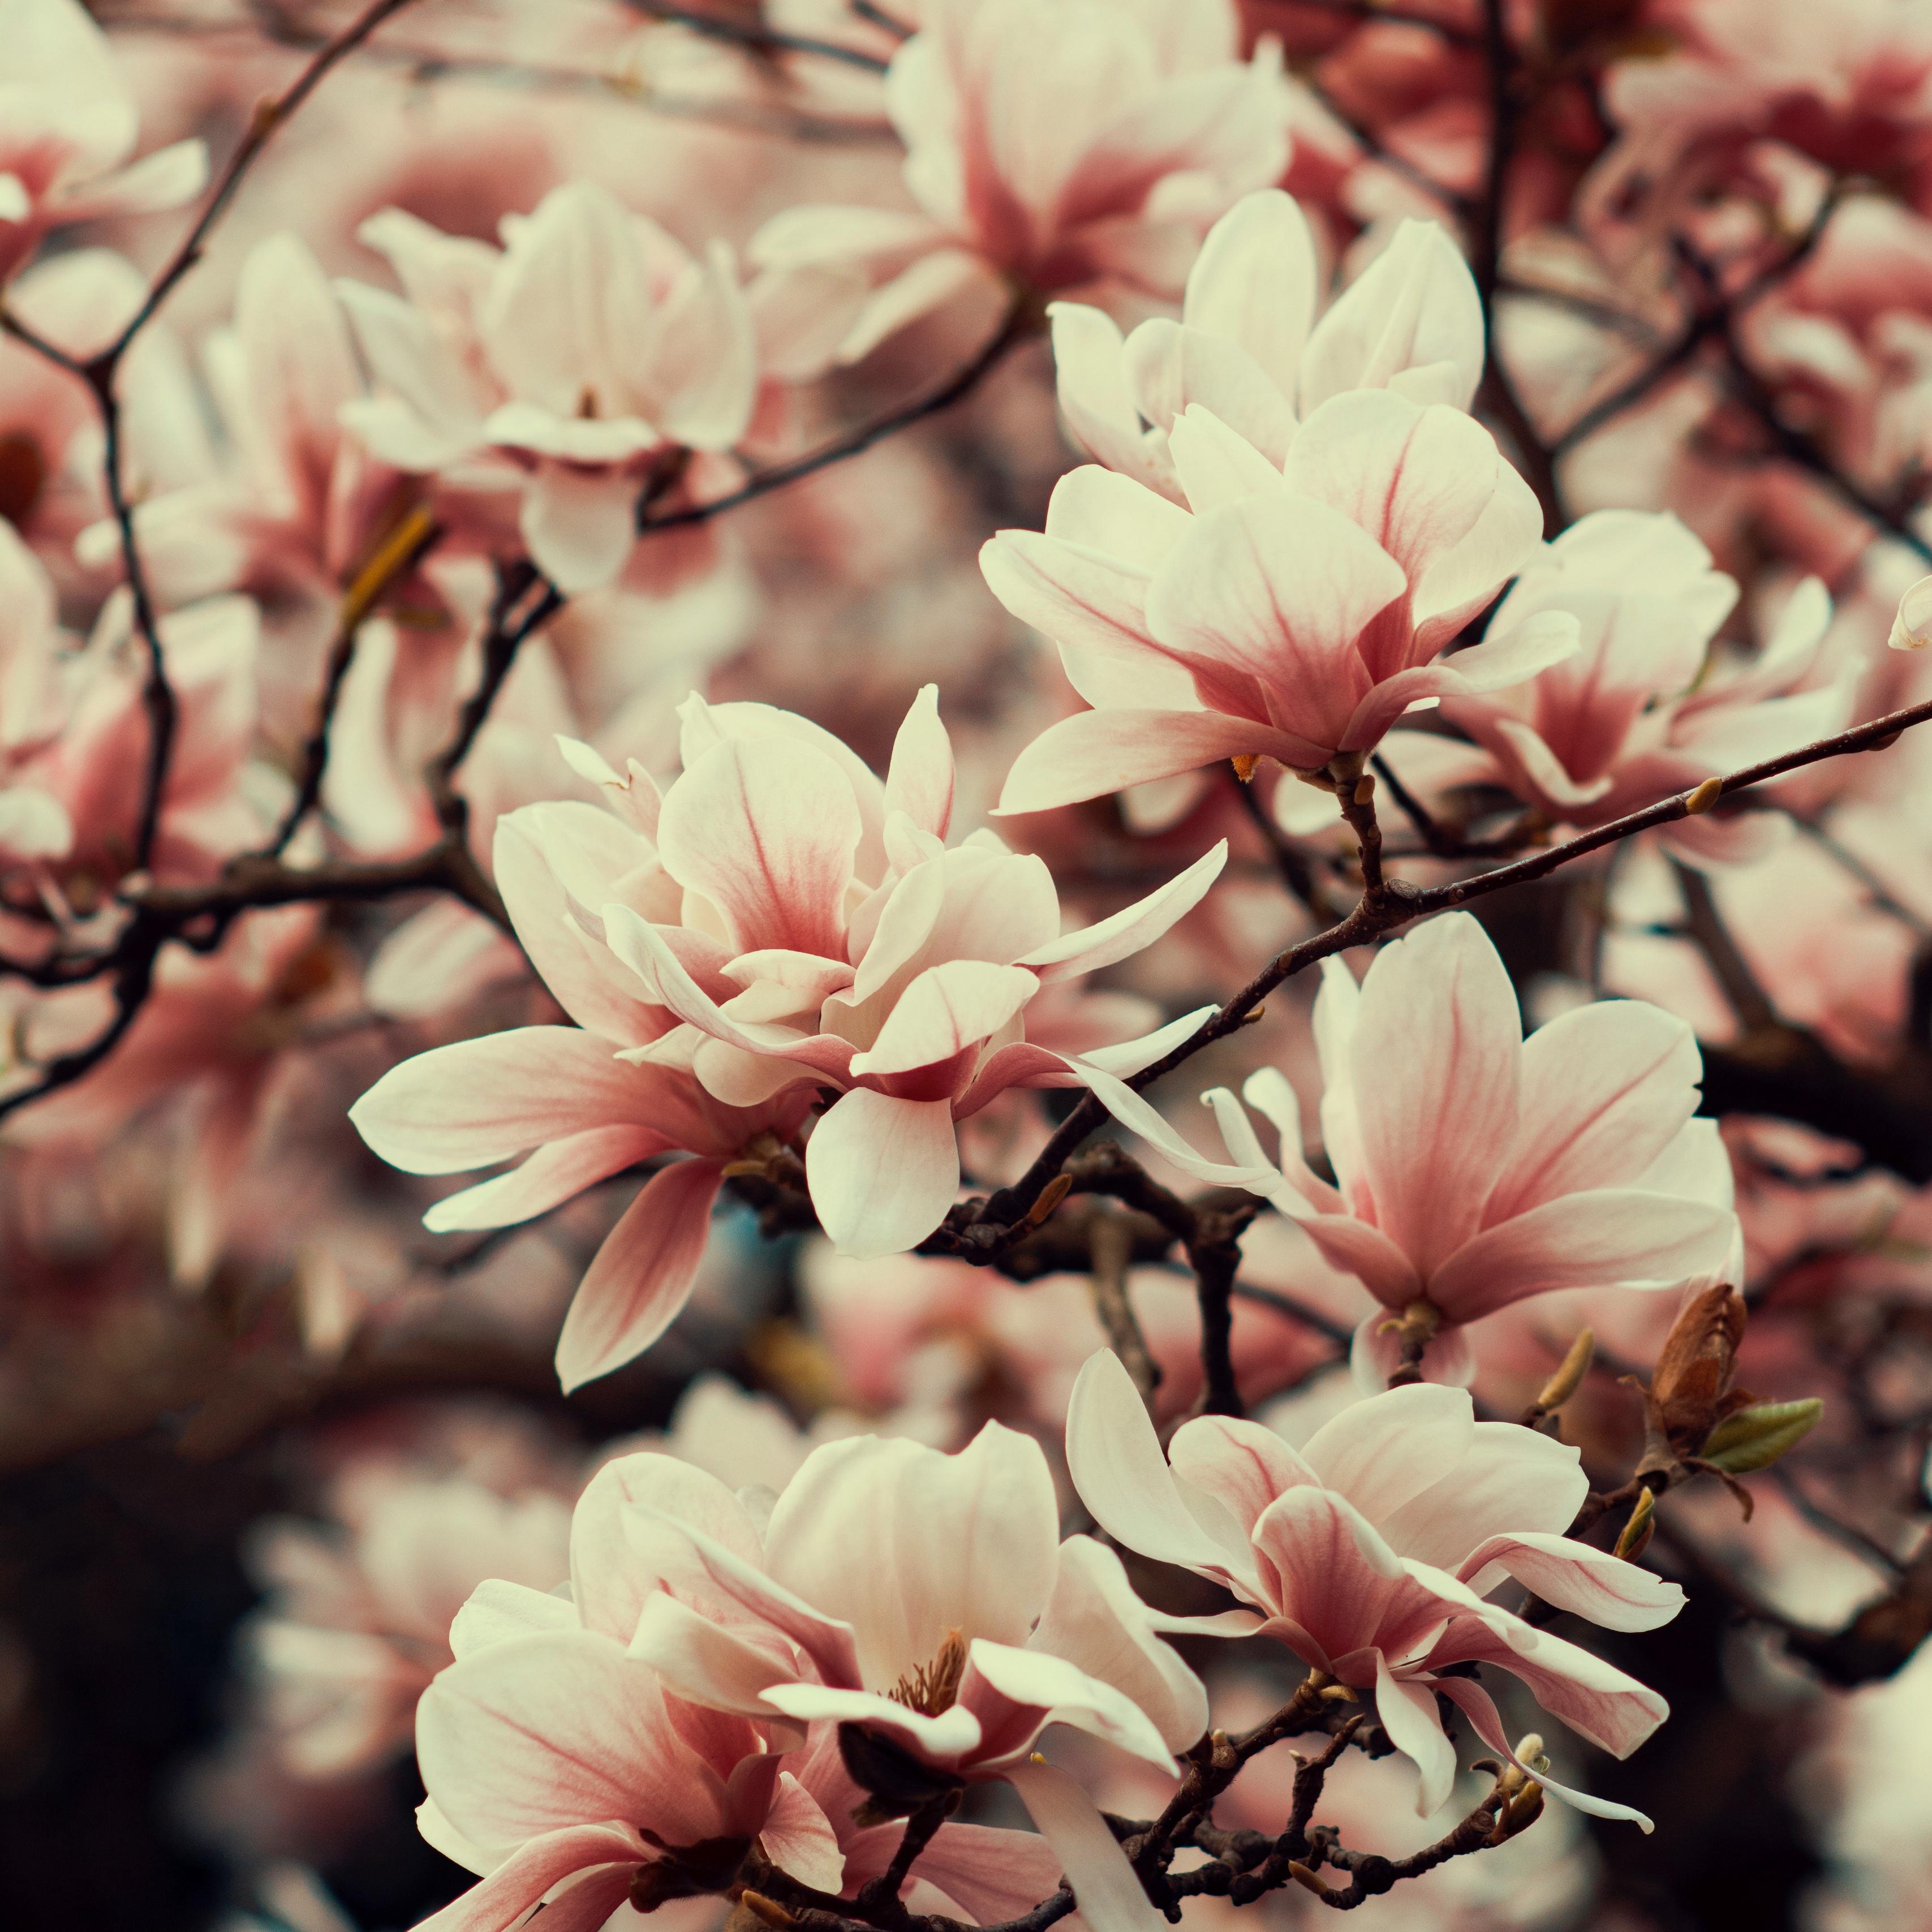 Download wallpaper 3415x3415 magnolia, flowers, branches